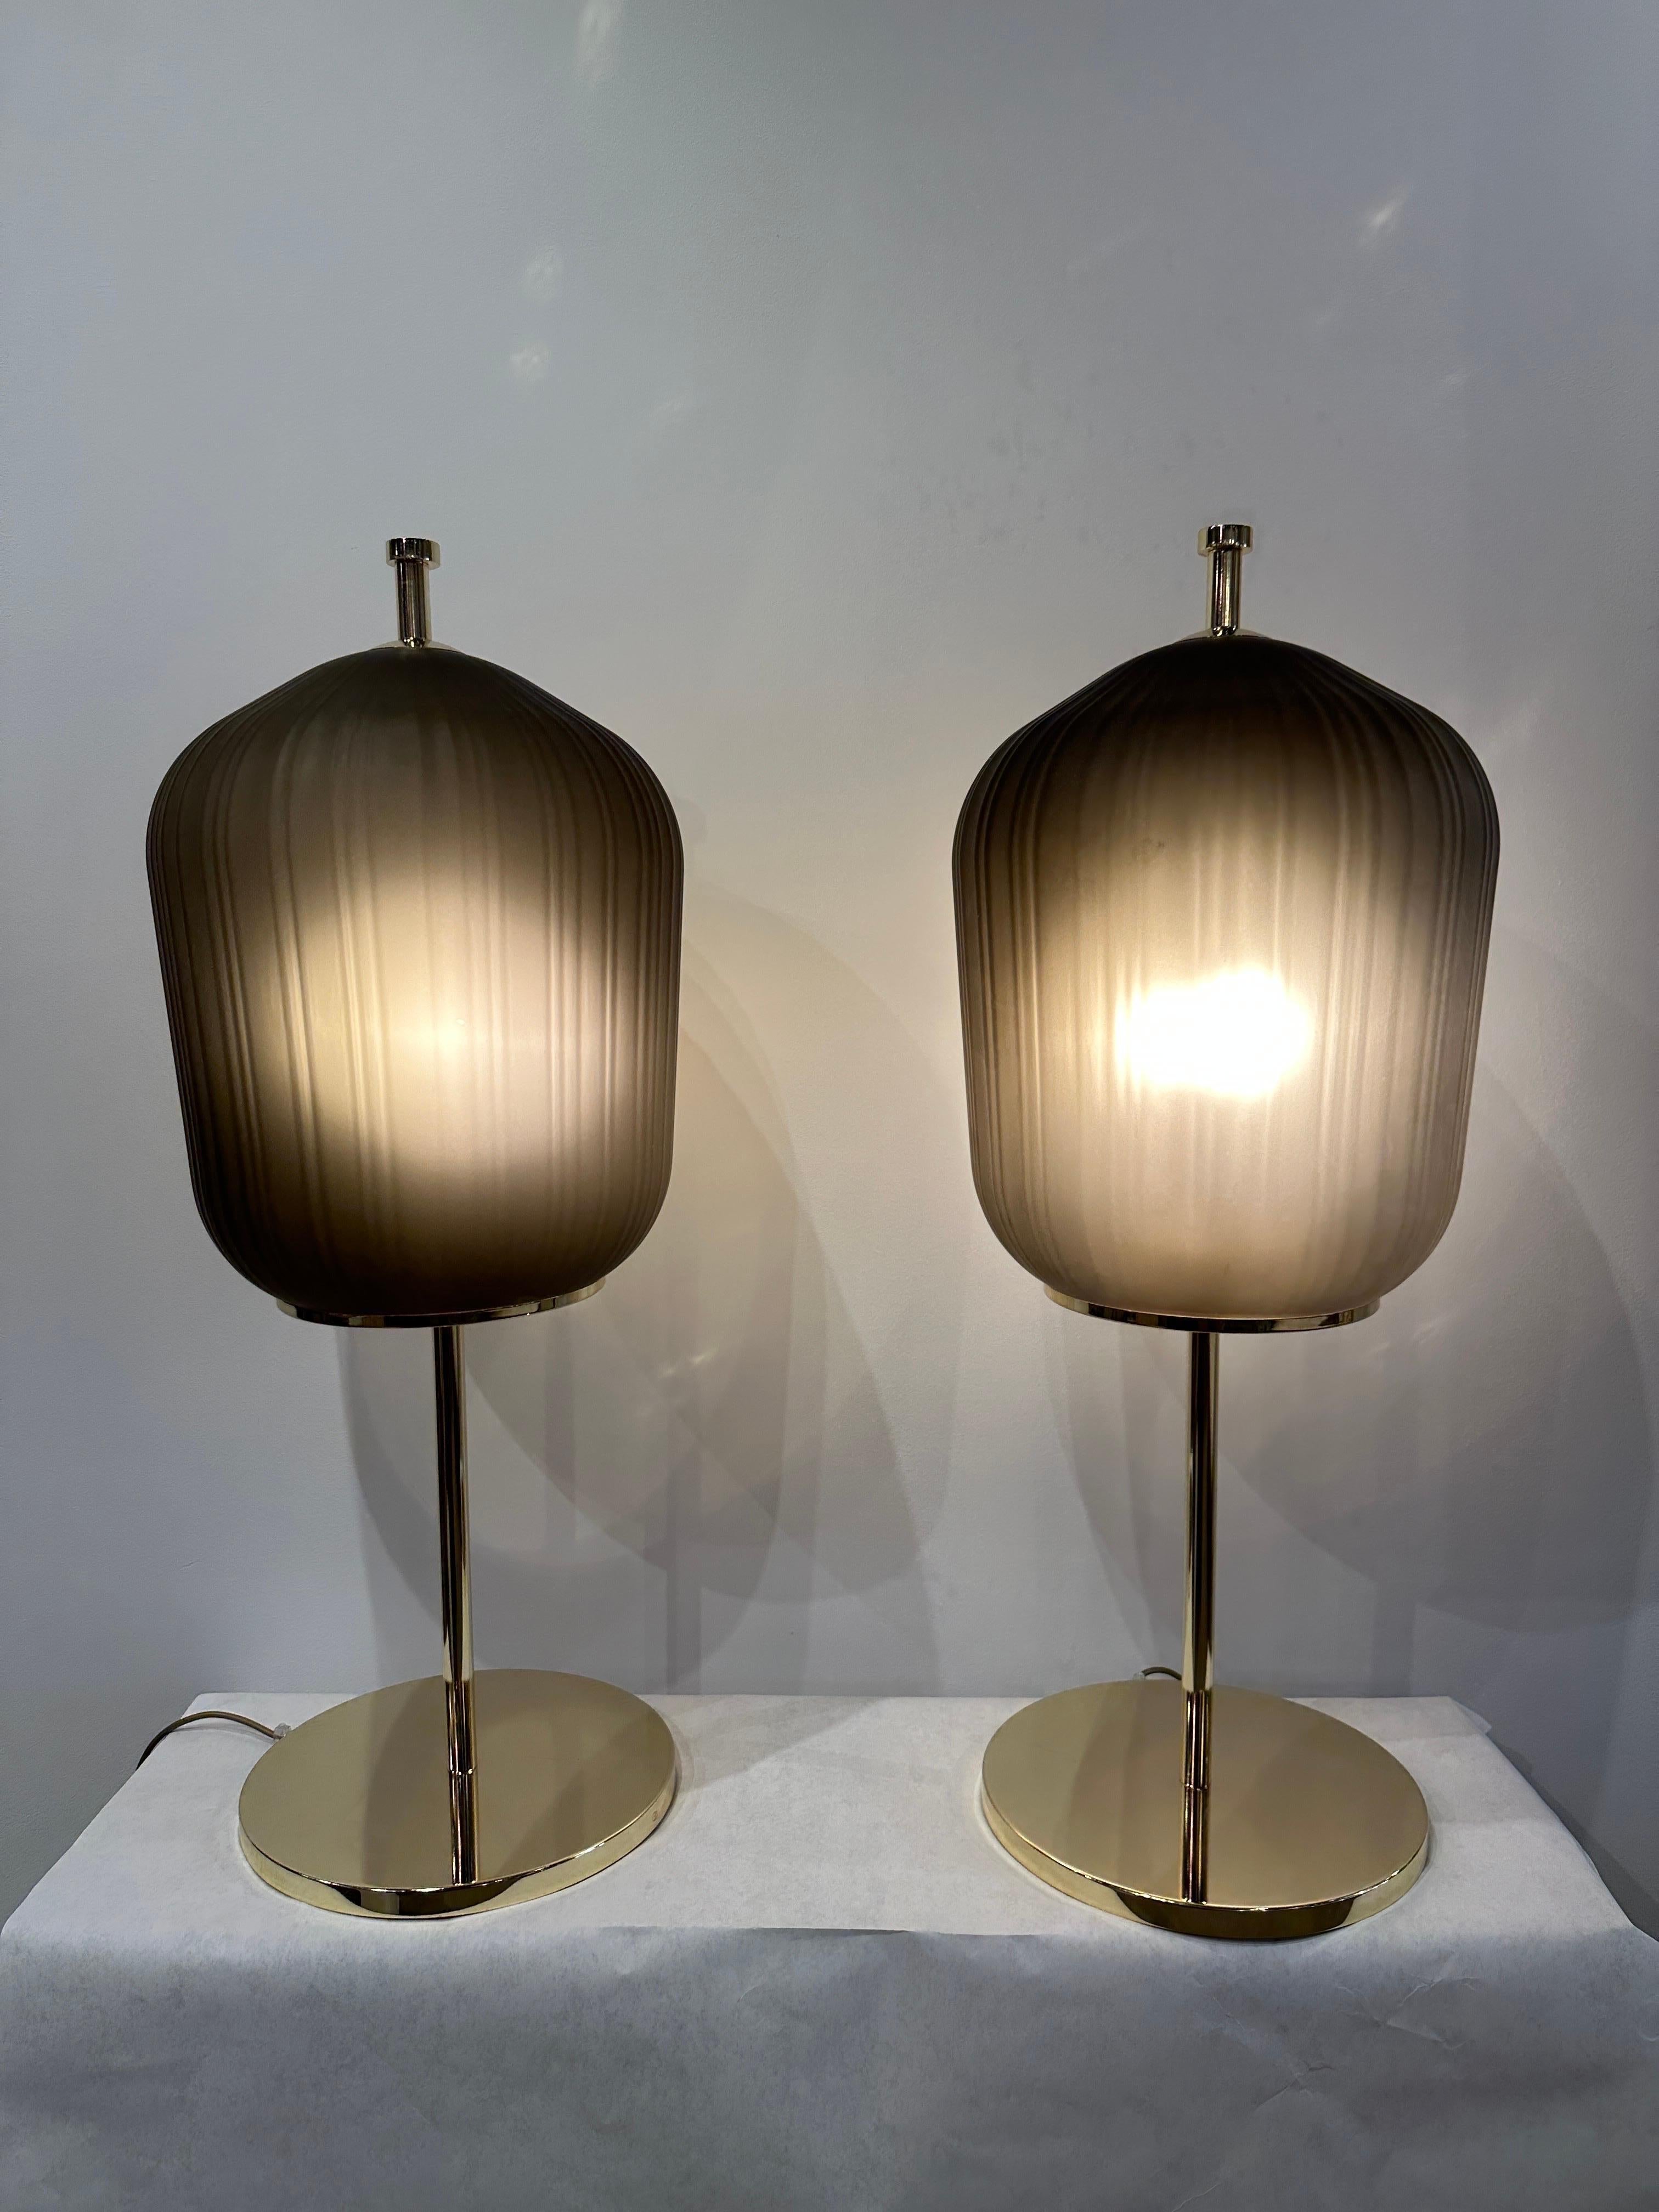 Oversized Murano Glass Lantern Table Lamps, Pair For Sale 1